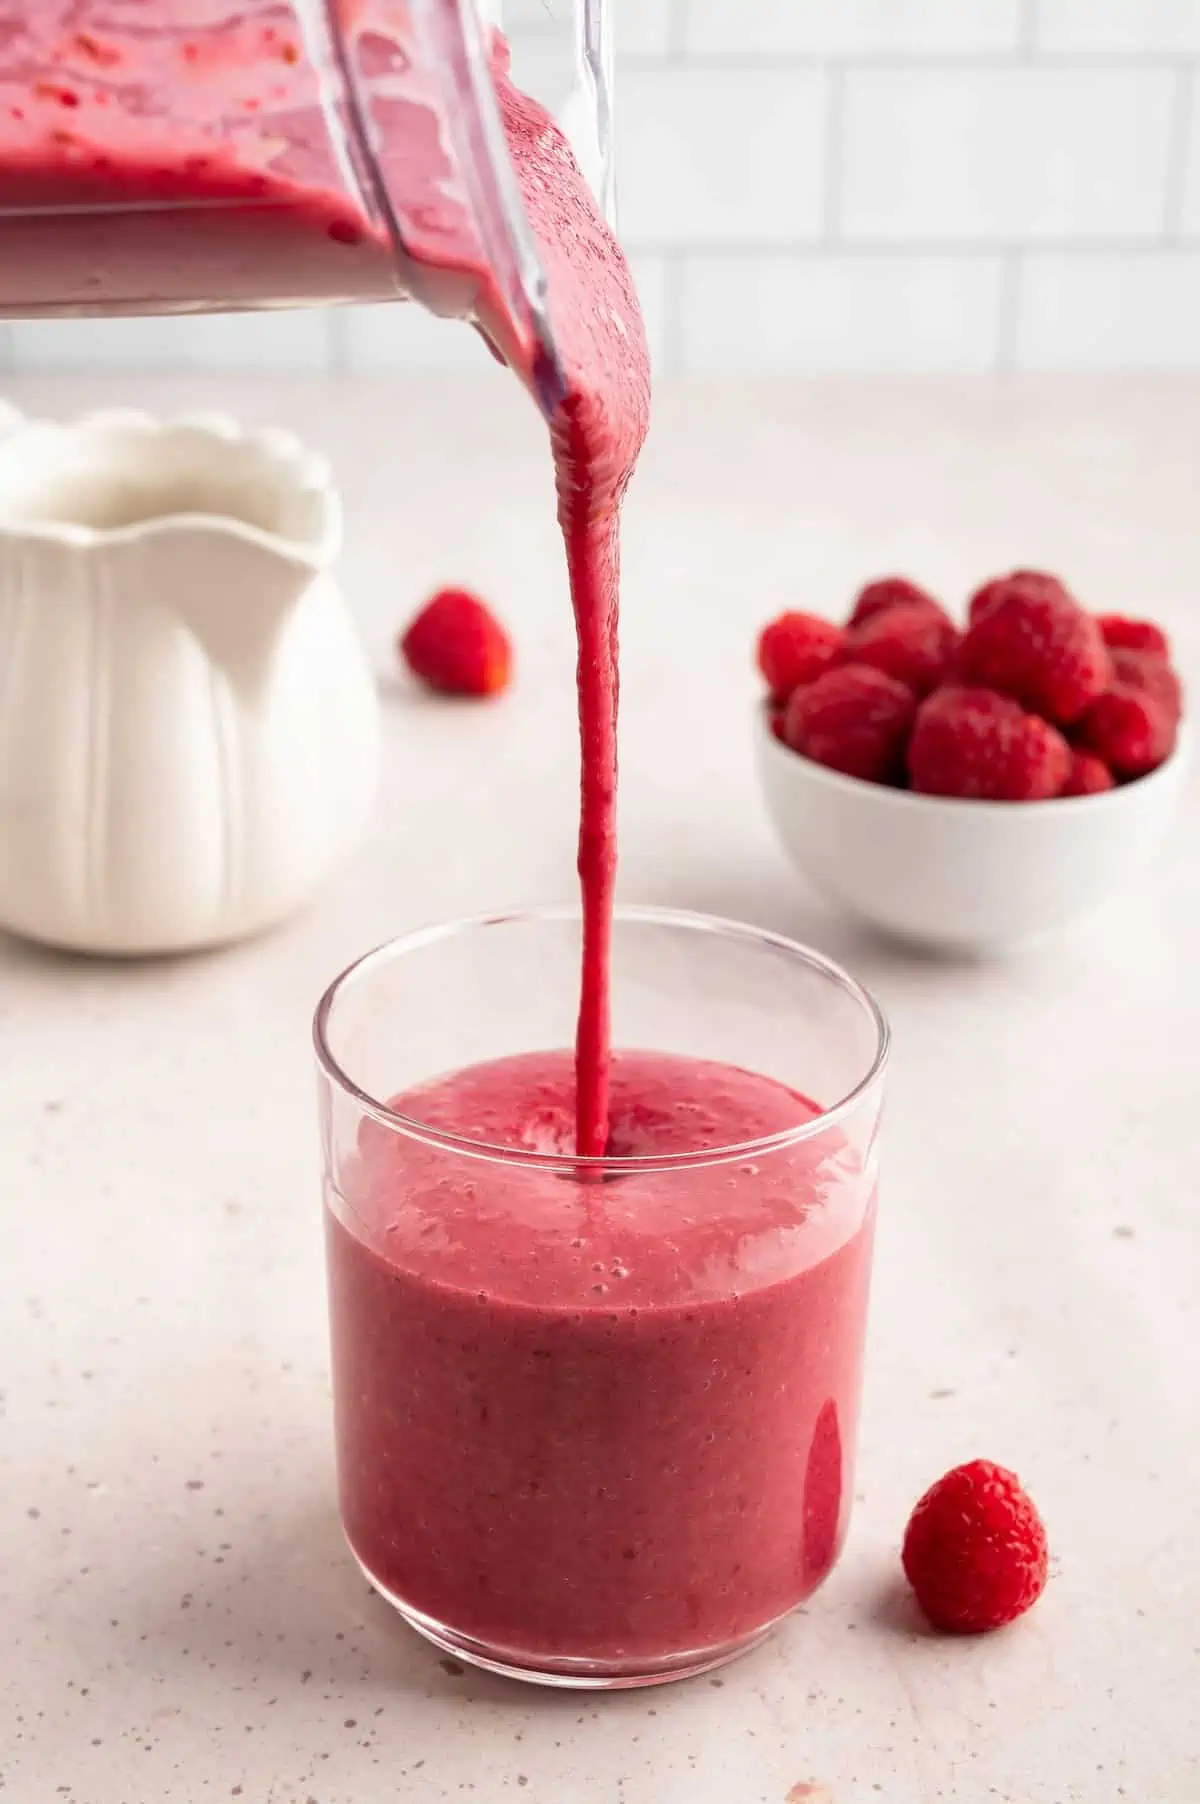 A raspberry smoothie being poured into a glass.